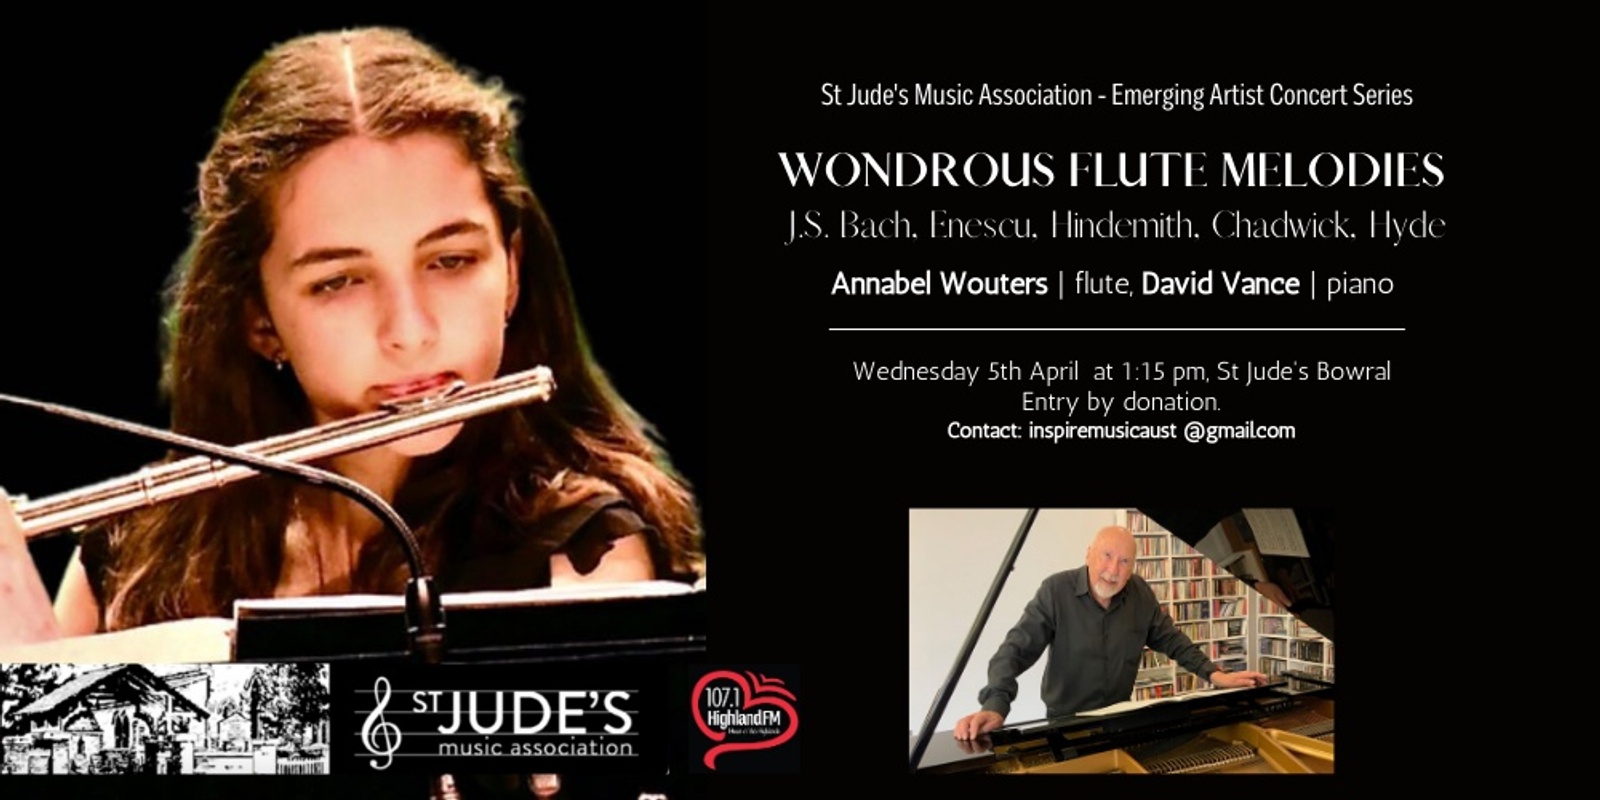 Banner image for St Jude's Wondrous Flute Melodies   